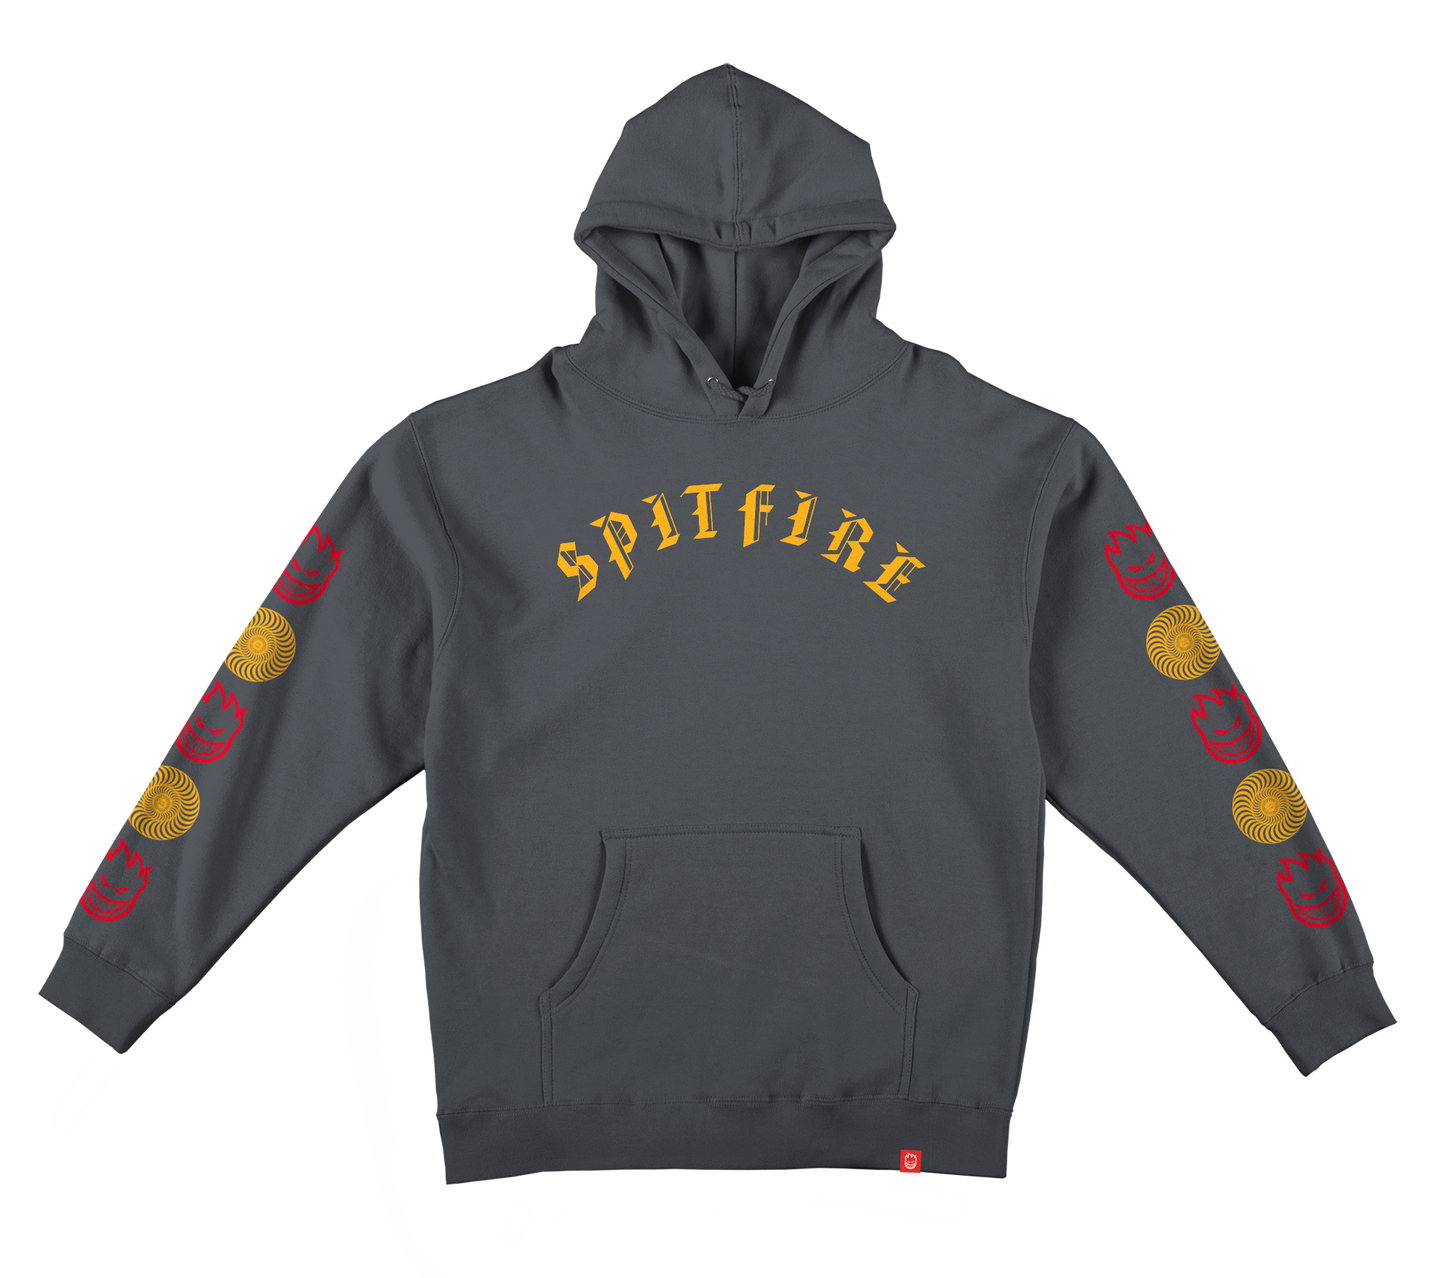 Spitfire Old E Bighead Combo Sleeve Pullover Sweatshirt - Charcoal/Gold/Red